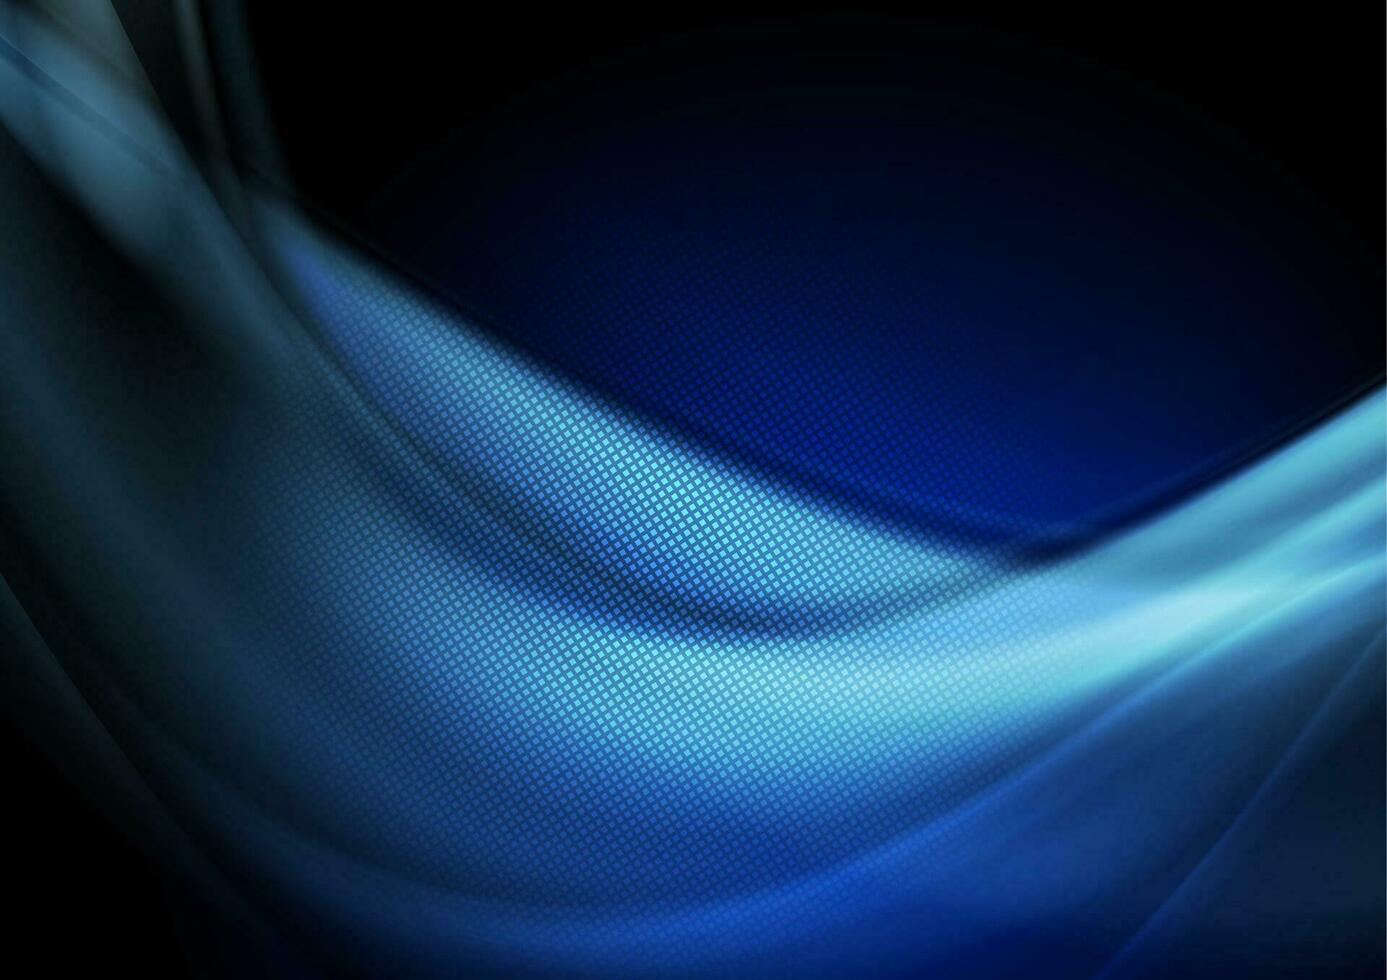 Dark blue abstract smooth flowing waves background vector